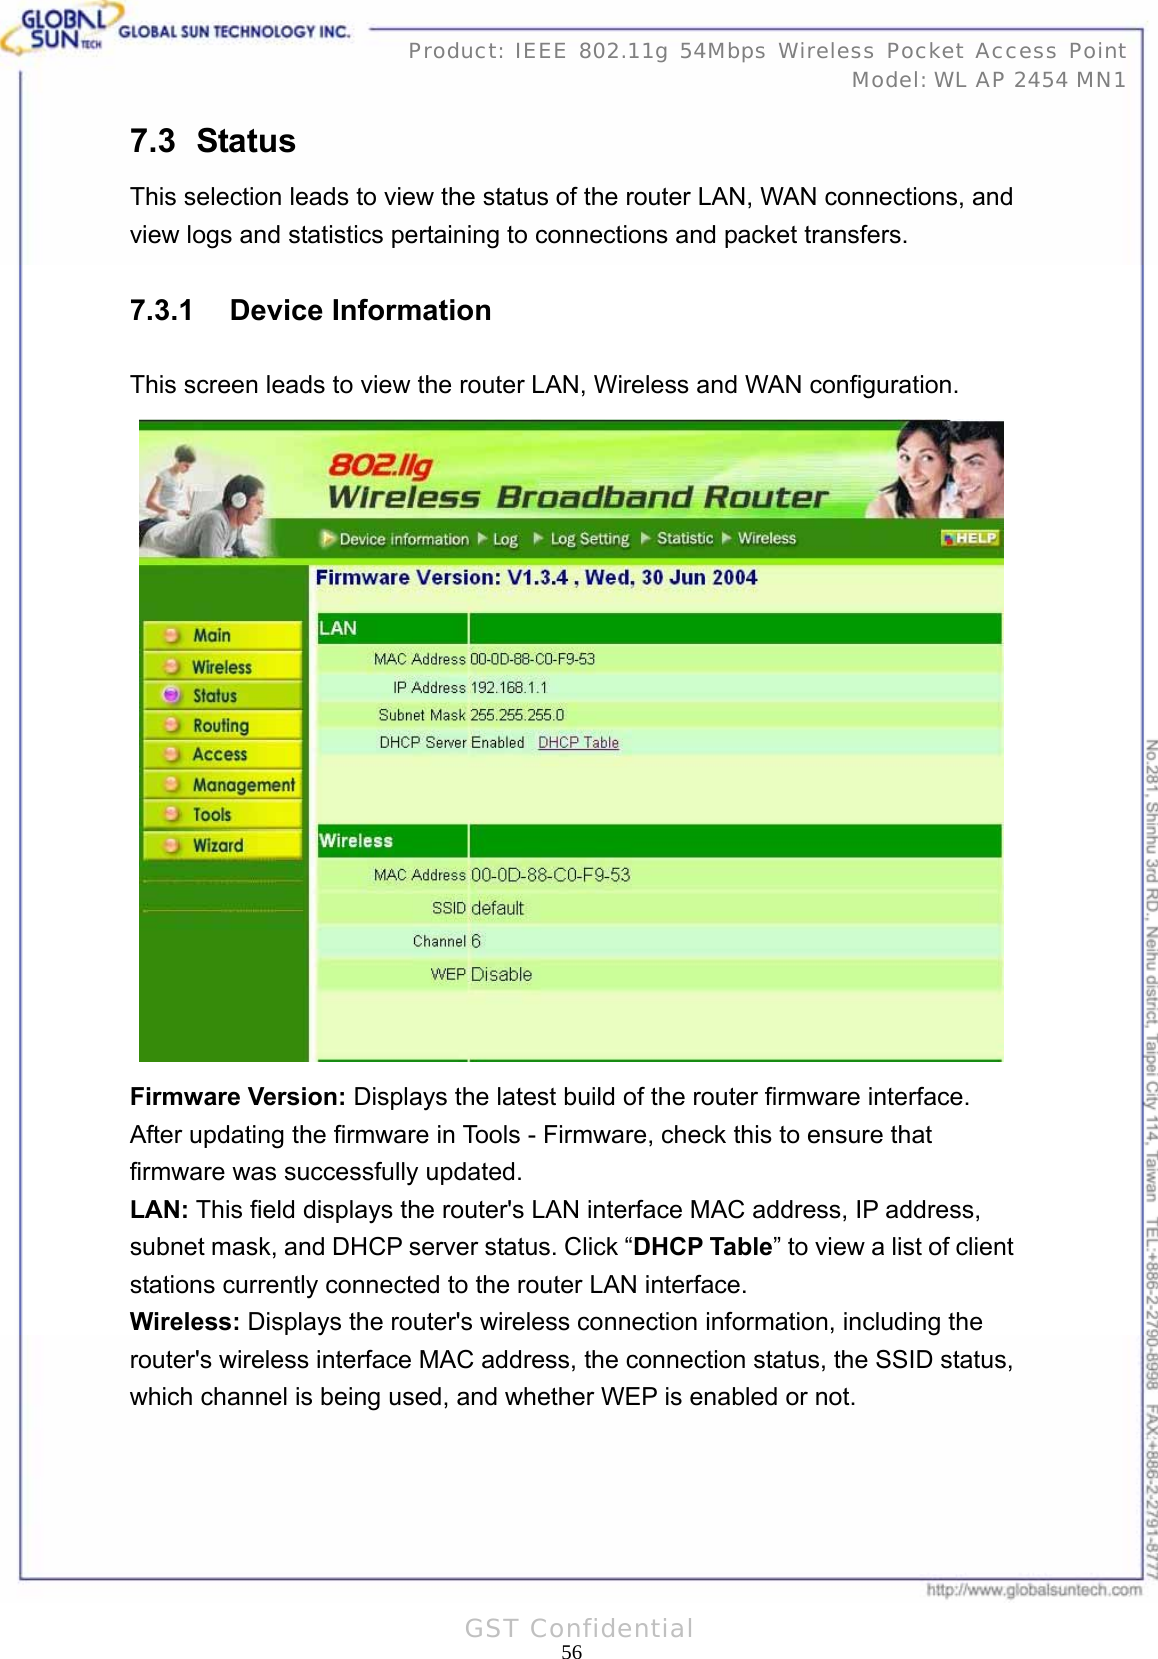   56Product: IEEE 802.11g 54Mbps Wireless Pocket Access Point Model: WL AP 2454 MN1GST Confidential 7.3   Status This selection leads to view the status of the router LAN, WAN connections, and view logs and statistics pertaining to connections and packet transfers. 7.3.1 Device Information This screen leads to view the router LAN, Wireless and WAN configuration.  Firmware Version: Displays the latest build of the router firmware interface. After updating the firmware in Tools - Firmware, check this to ensure that firmware was successfully updated. LAN: This field displays the router&apos;s LAN interface MAC address, IP address, subnet mask, and DHCP server status. Click “DHCP Table” to view a list of client stations currently connected to the router LAN interface. Wireless: Displays the router&apos;s wireless connection information, including the router&apos;s wireless interface MAC address, the connection status, the SSID status, which channel is being used, and whether WEP is enabled or not.  